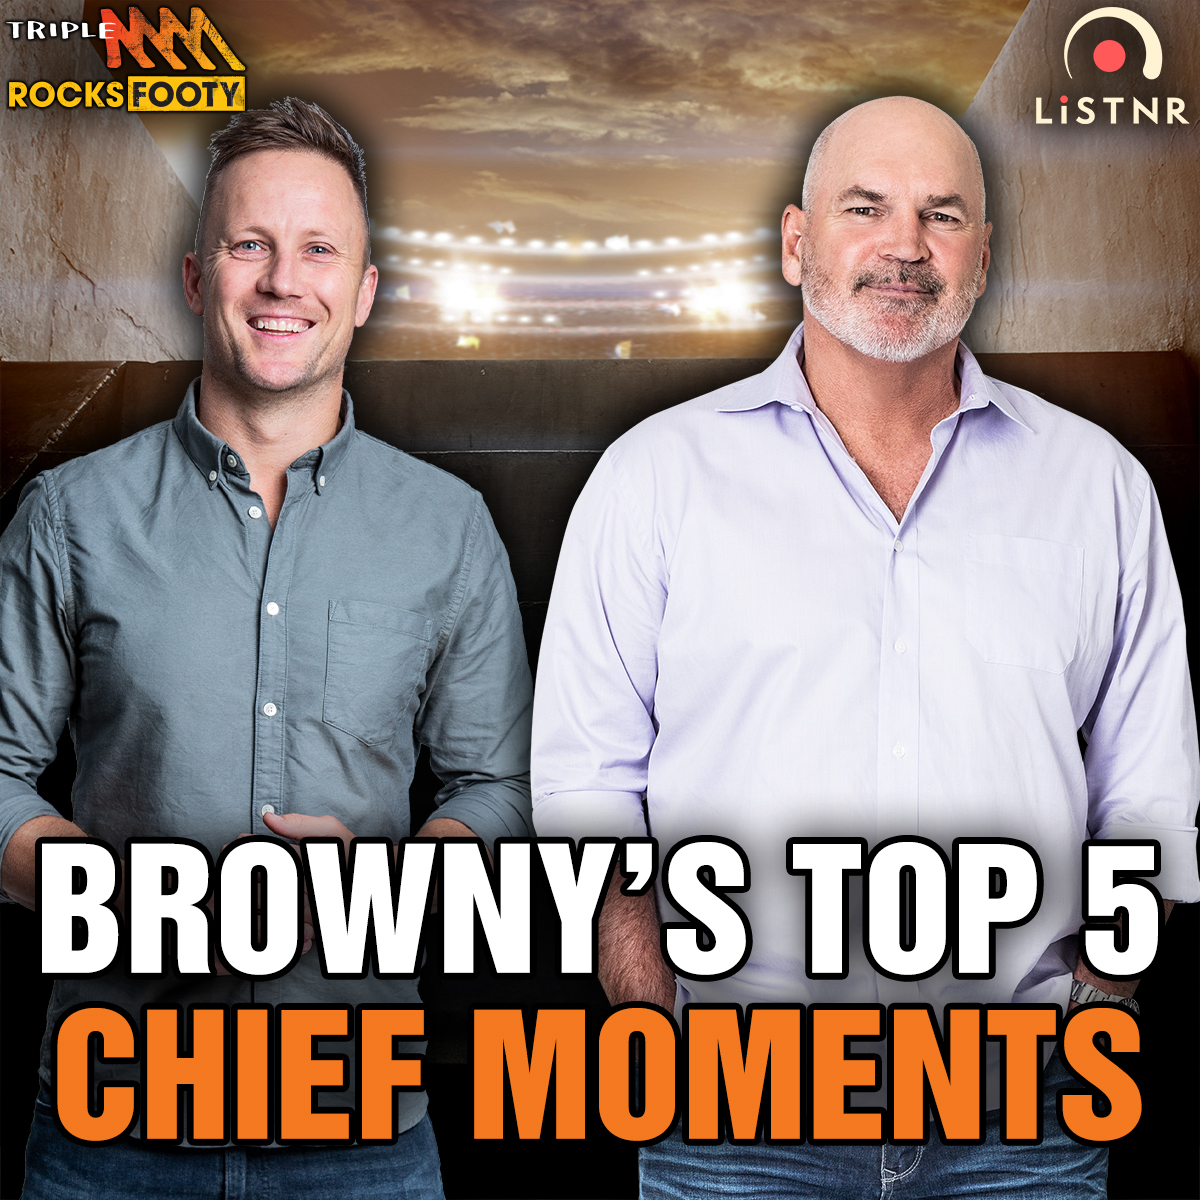 Browny's Top 5 Chief Moments